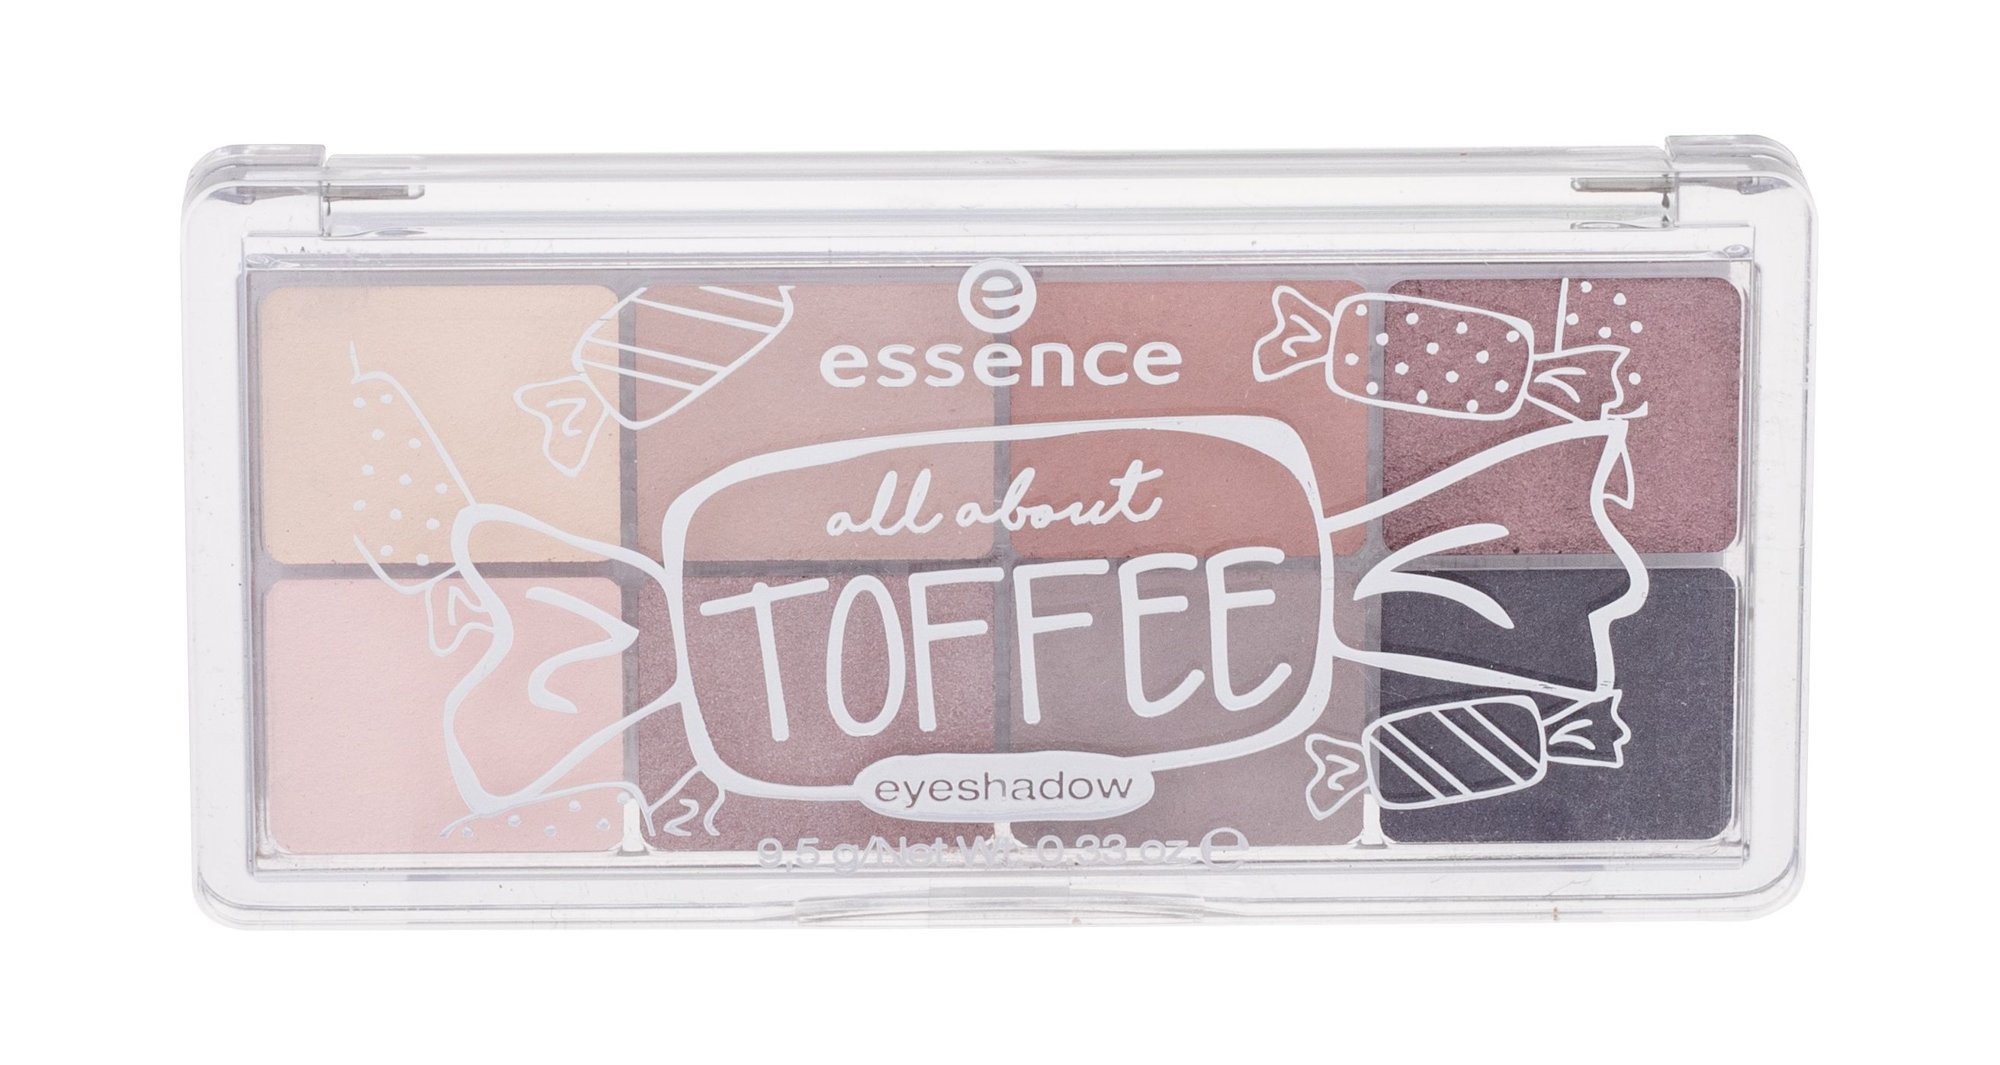 Essence All About Toffee Eyeshadow